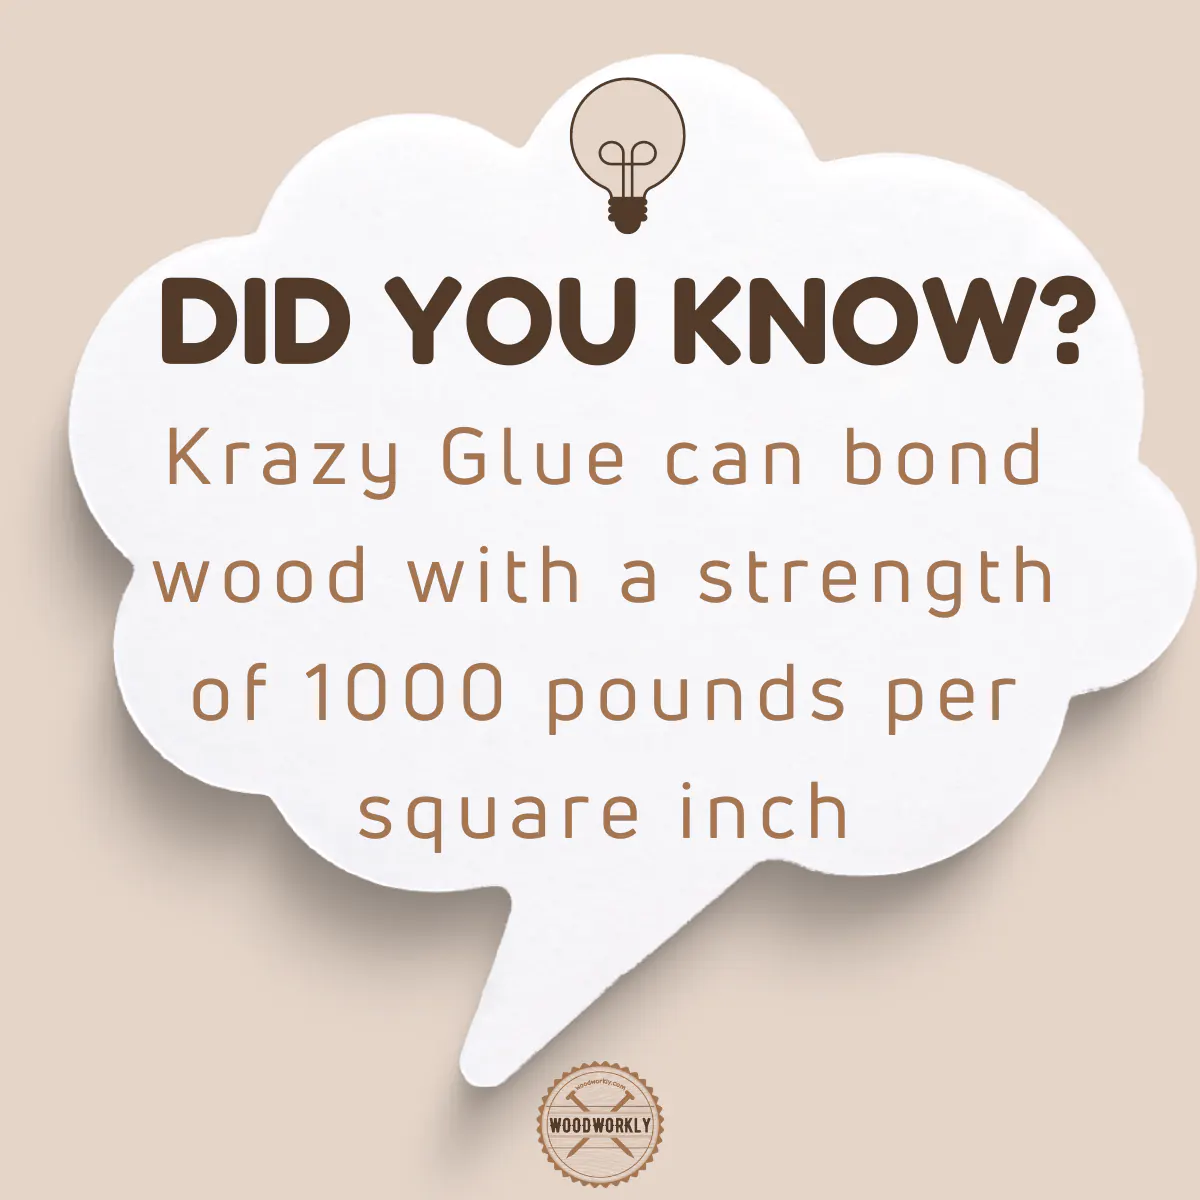 Did you know fact about using Krazy glue on wood